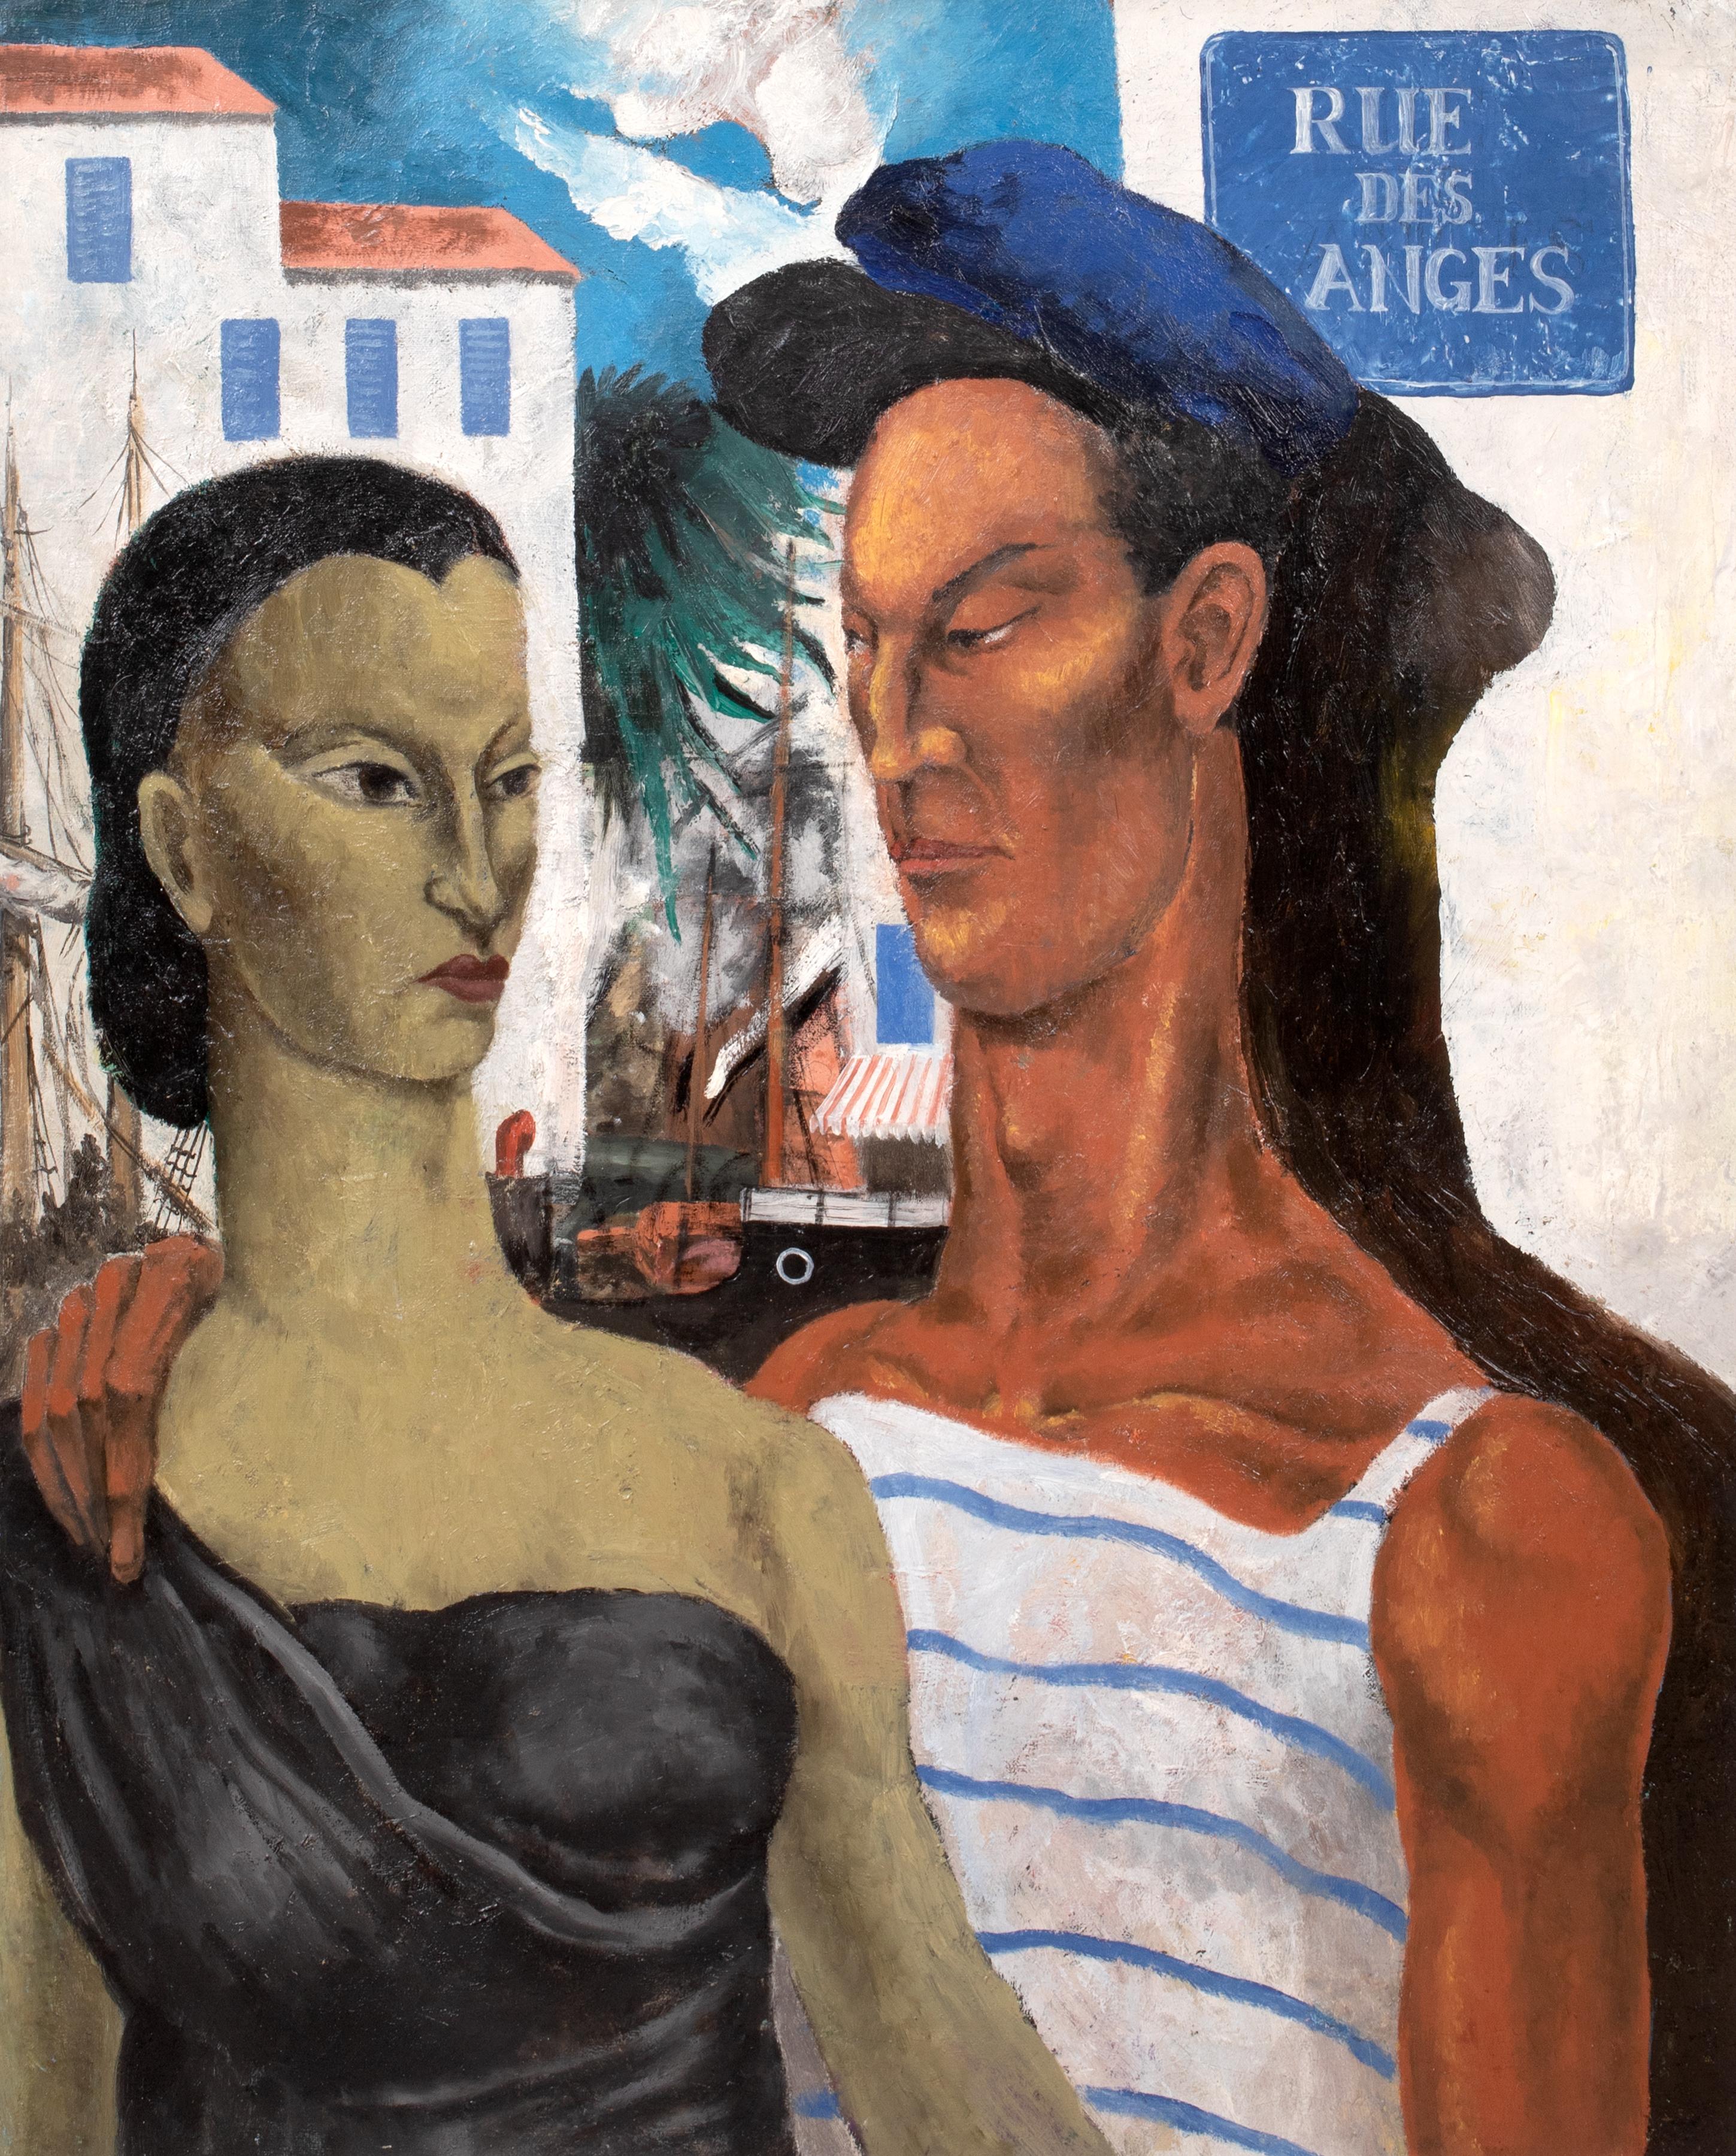 Lovers At Rue De Anges Villeneuve-Loubet, circa 1920

Large circa 1920 portrait of two French Lovers at Rue De Anges, Villeneuve-Loubet, oil on canvas. Superb quality and condition portrait of a sailor and his lover in the street of